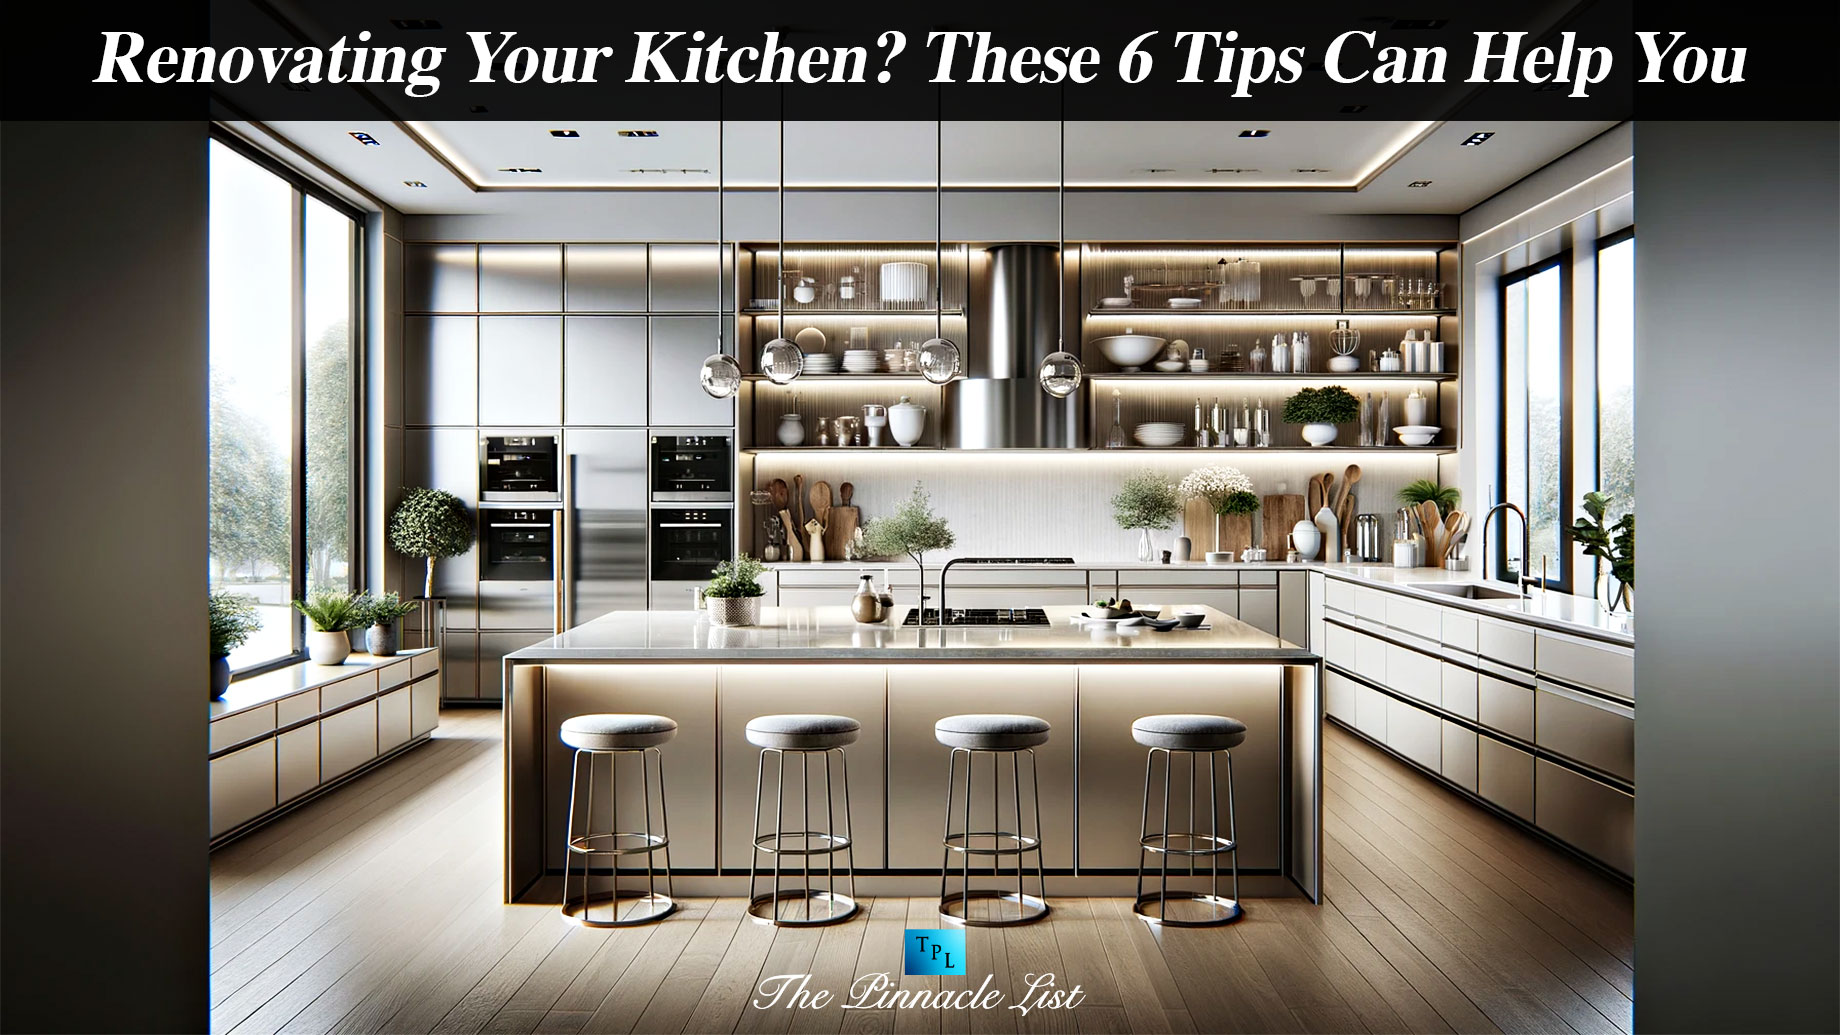 Renovating Your Kitchen? These 6 Tips Can Help You